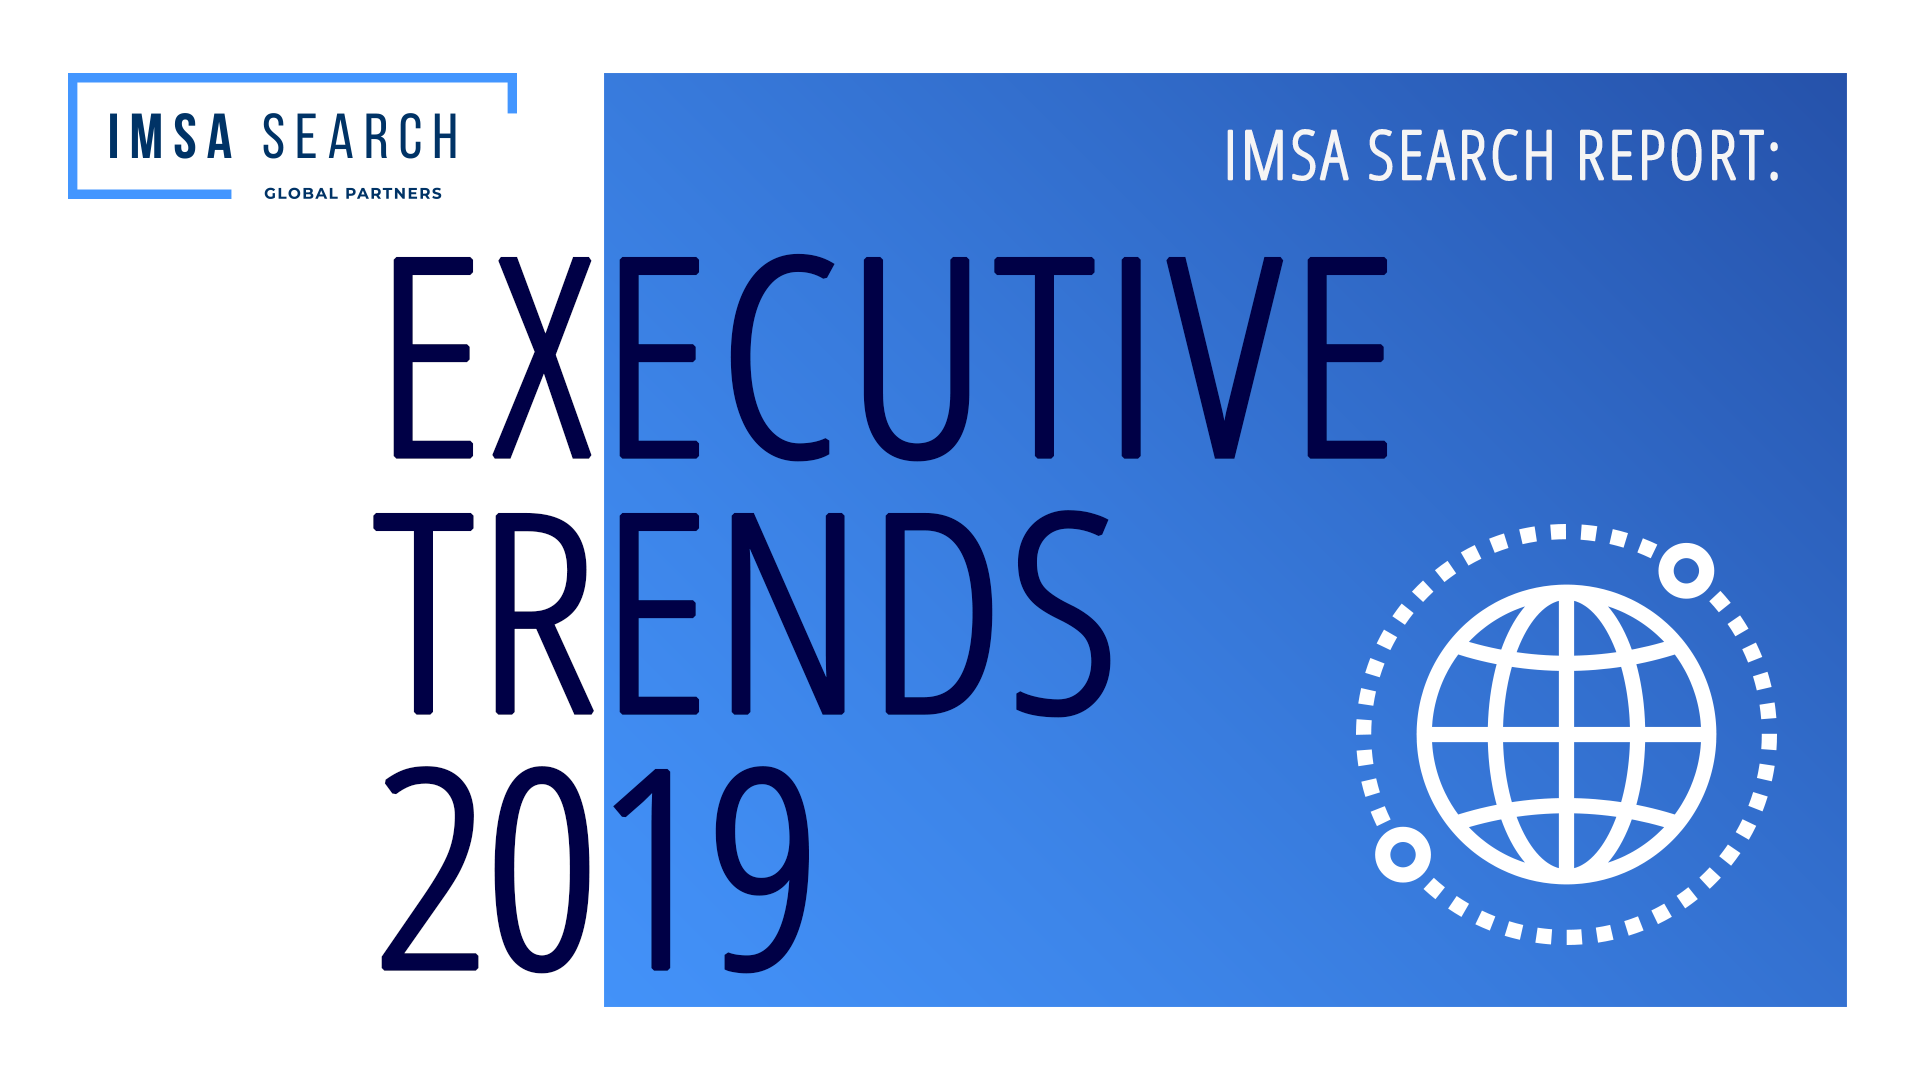 IMSA Search Executive Trends 2019 Opening